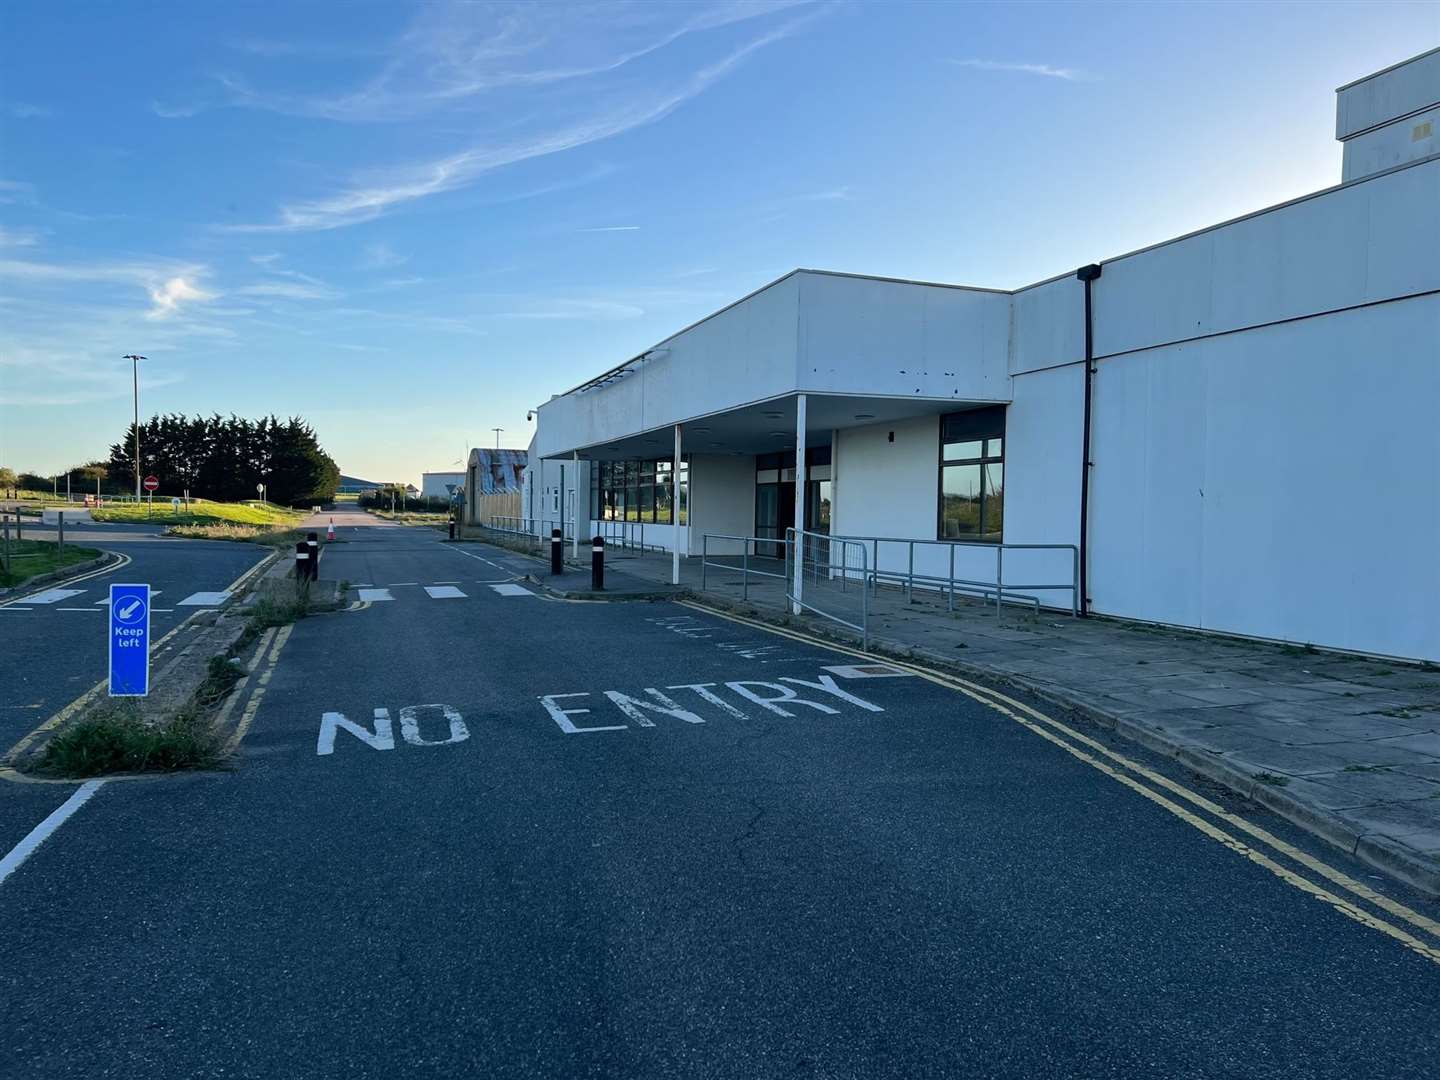 Exterior of Manston Airport as it is today